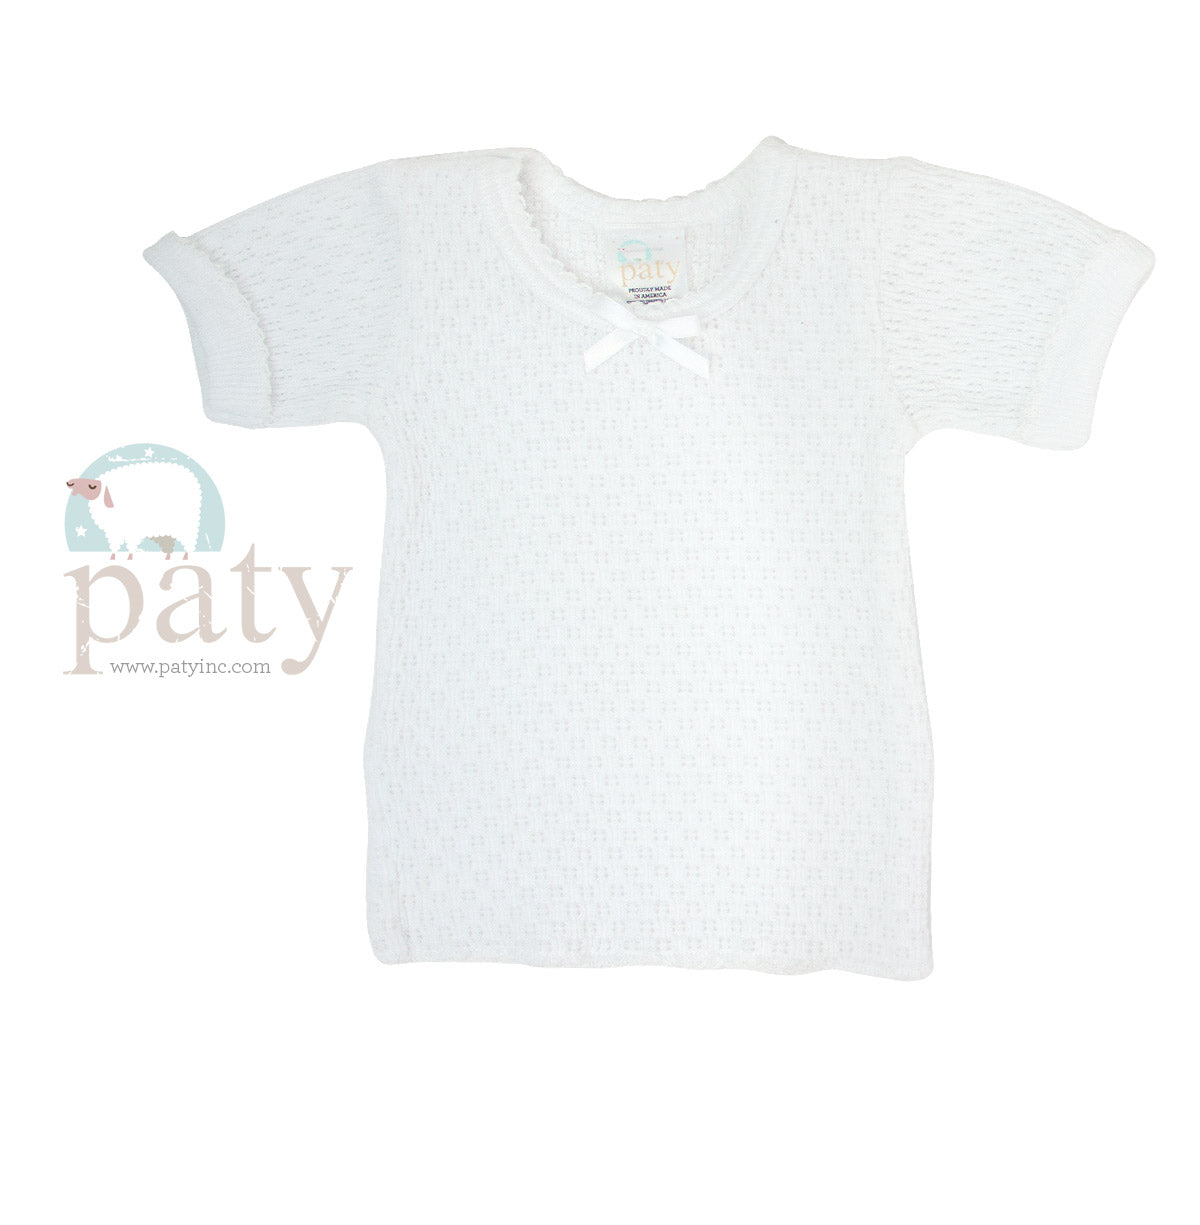 Signature Paty Top Baby Gown    - Chickie Collective